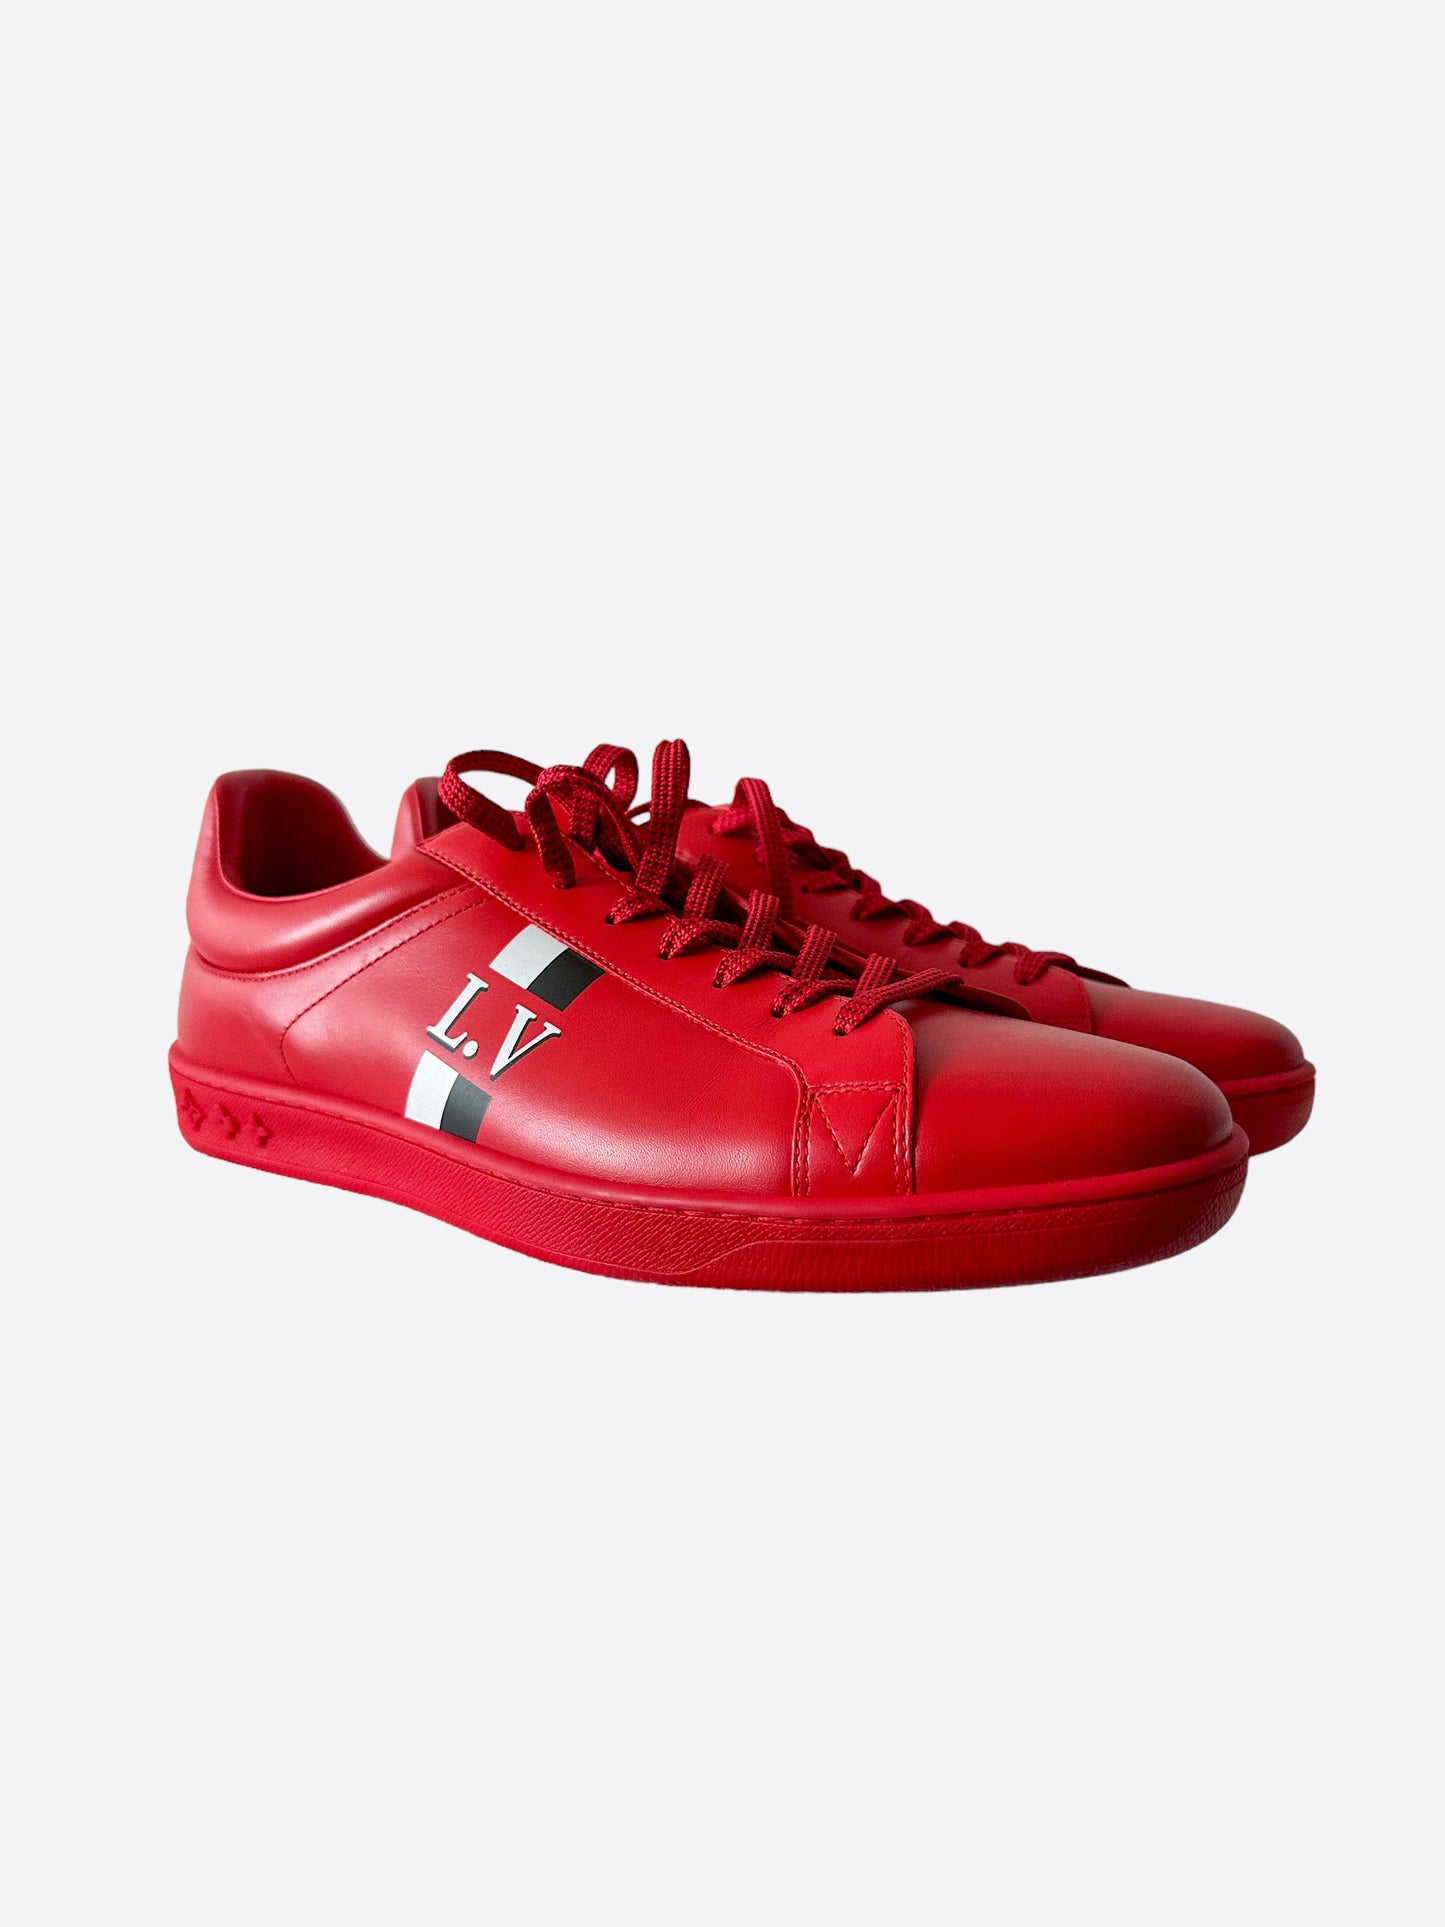 lv red sneakers